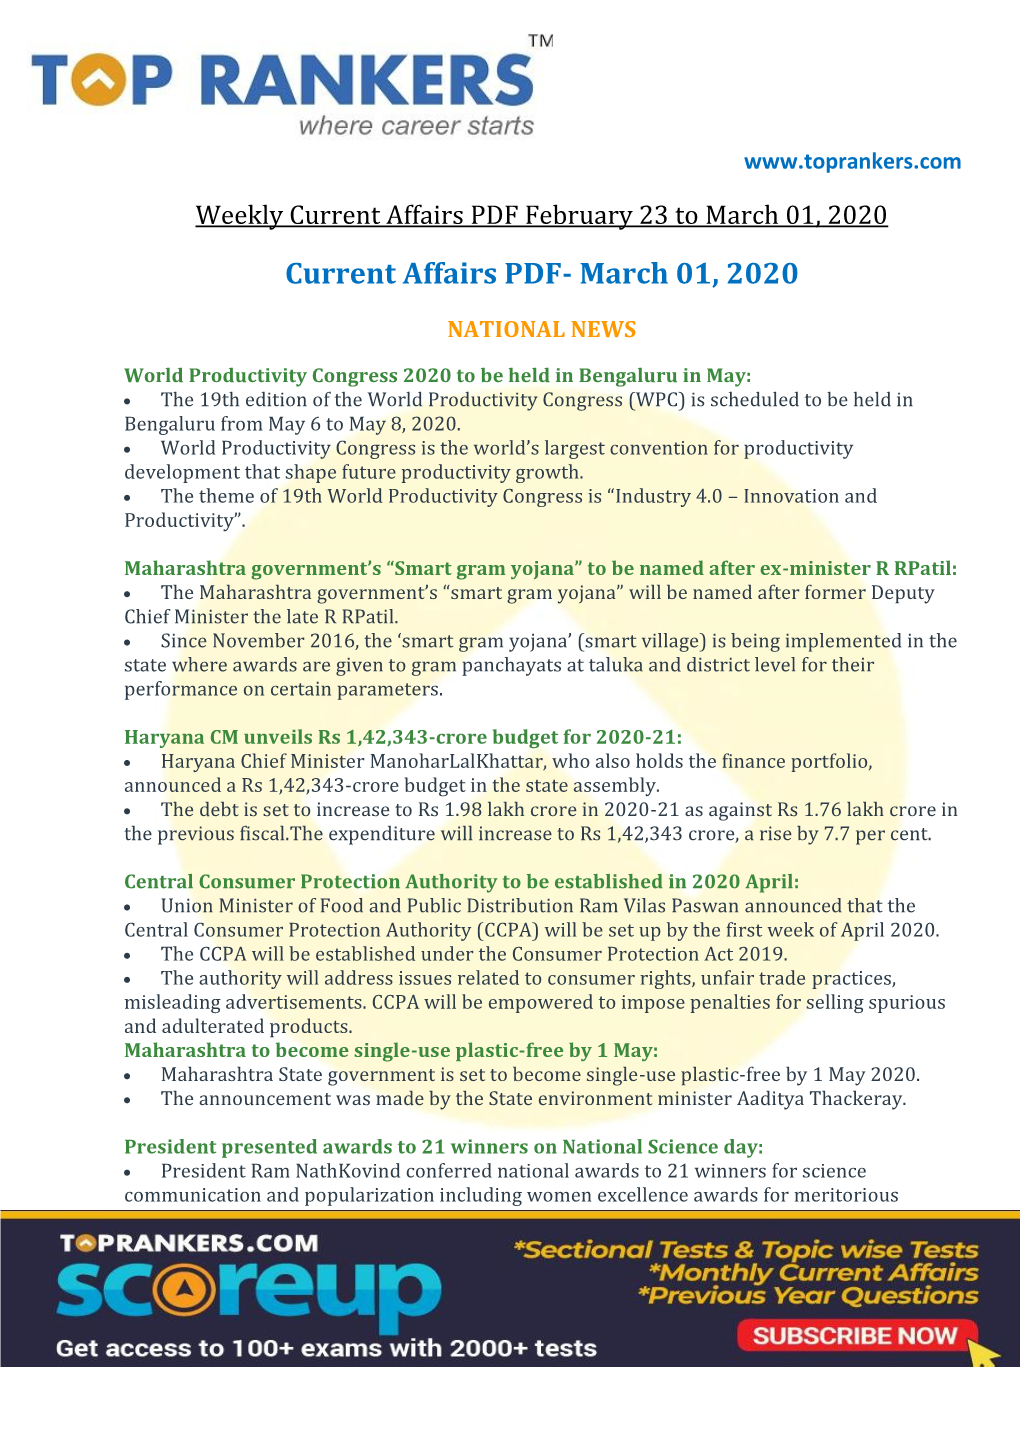 Current Affairs PDF February 23 to March 01, 2020